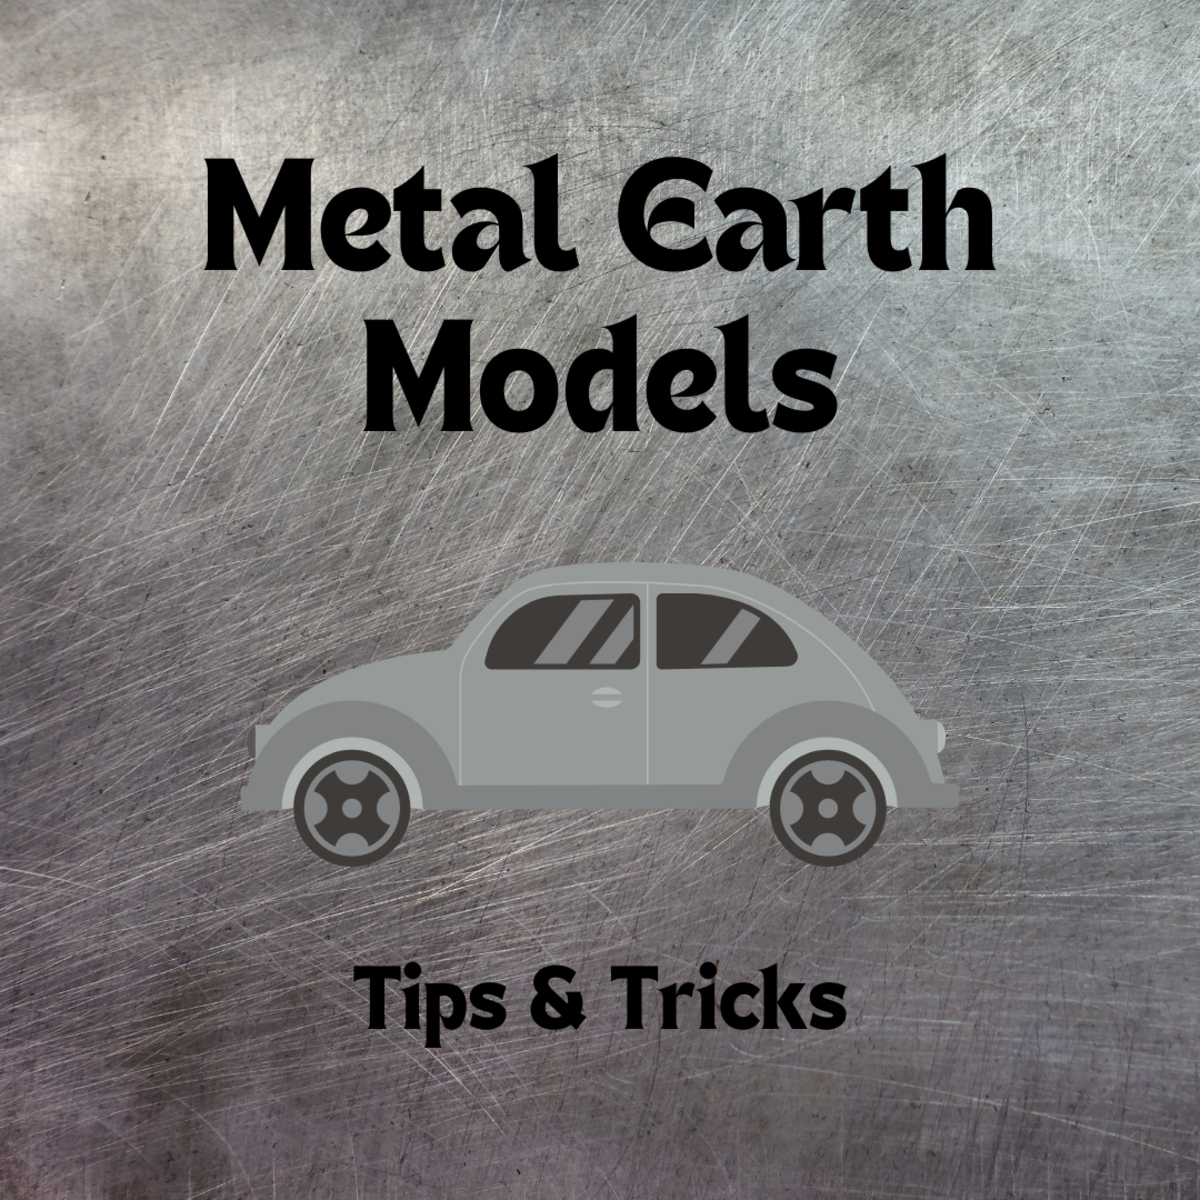 Tips and Tricks for Metal Earth Models